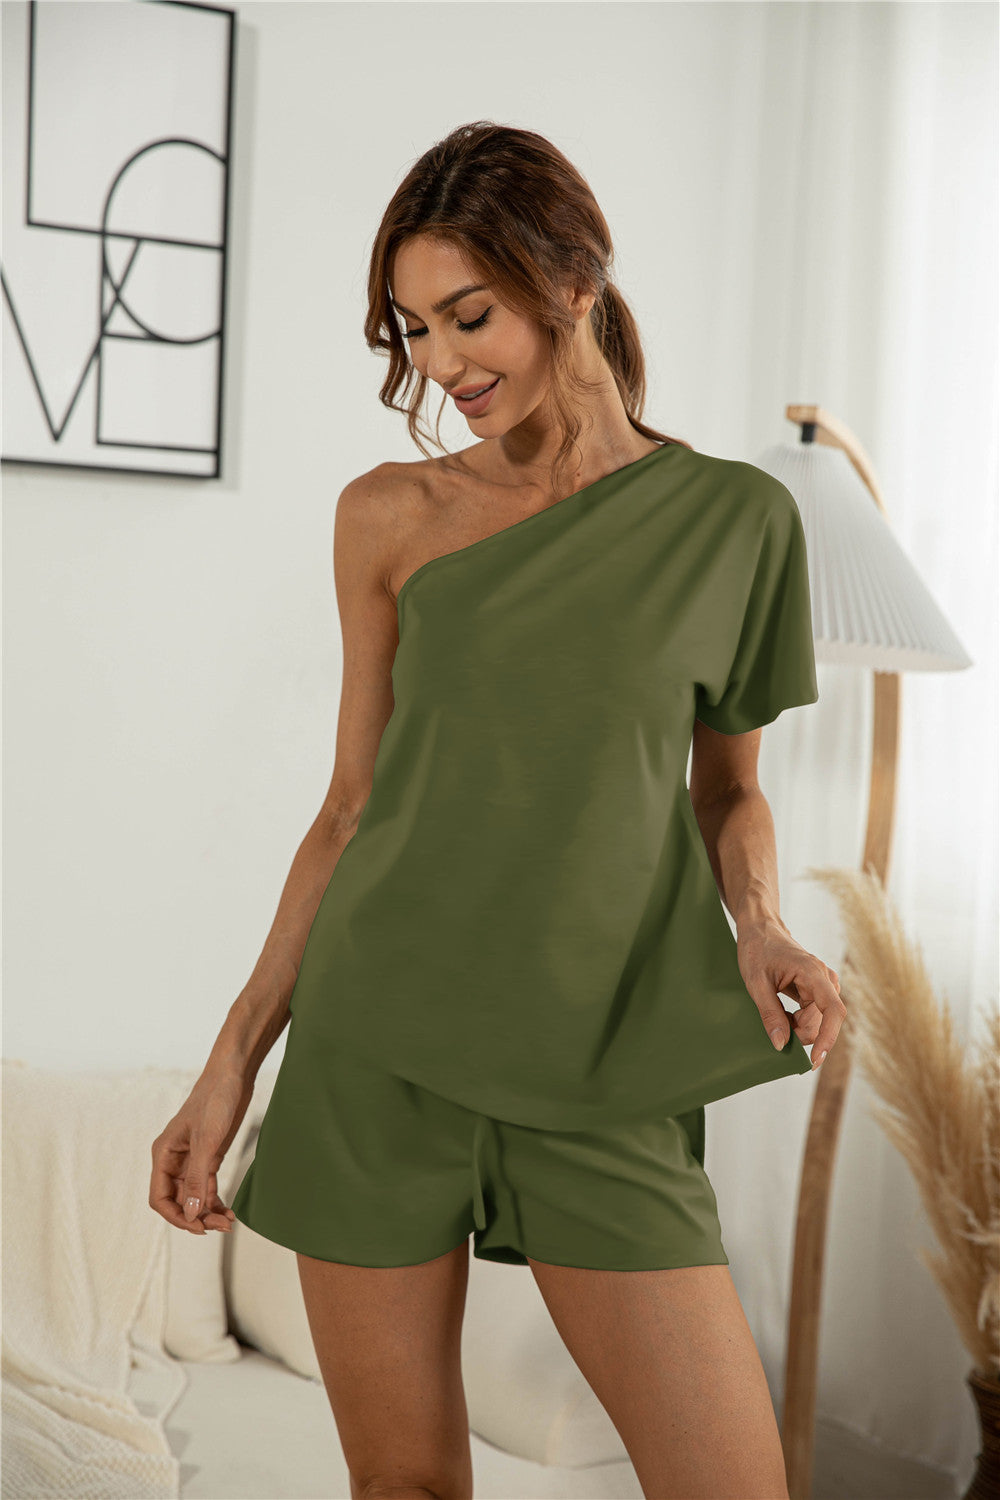 One Shoulder Asymmetry Top & Shorts - Tophatter Deals and Online Shopping - Electronics, Jewelry, Beauty, Health, Gadgets, Fashion - Tophatter's Discounts & Offers - tophatters